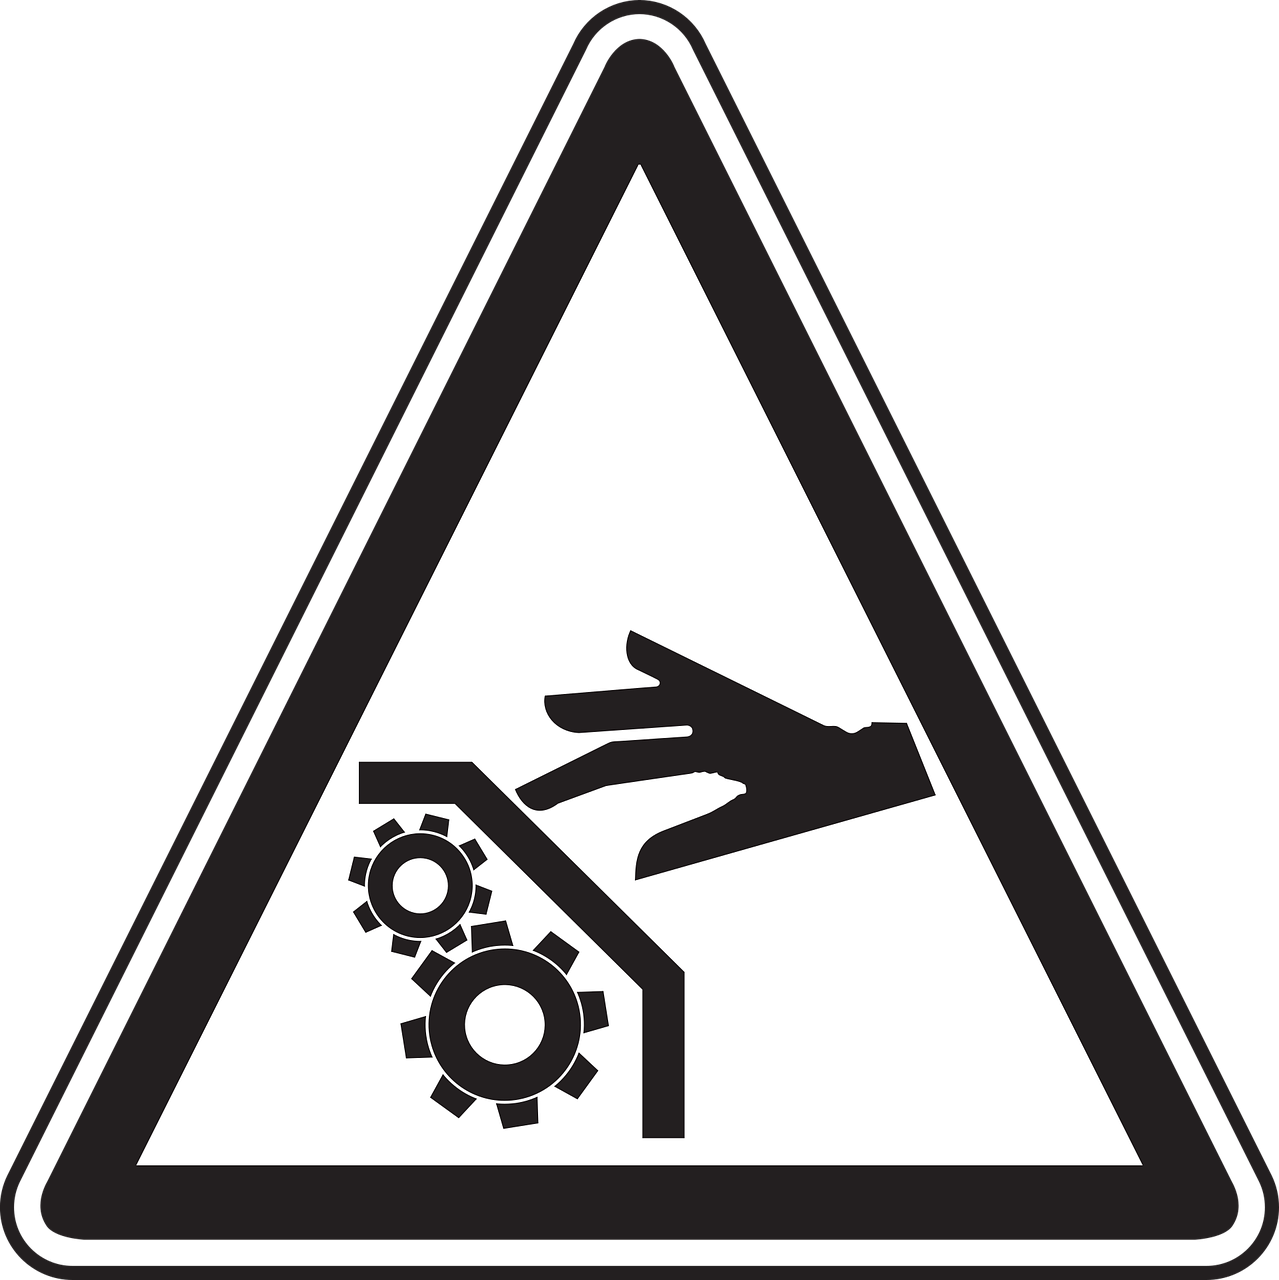 warning symbol meaning ensure guards are installed